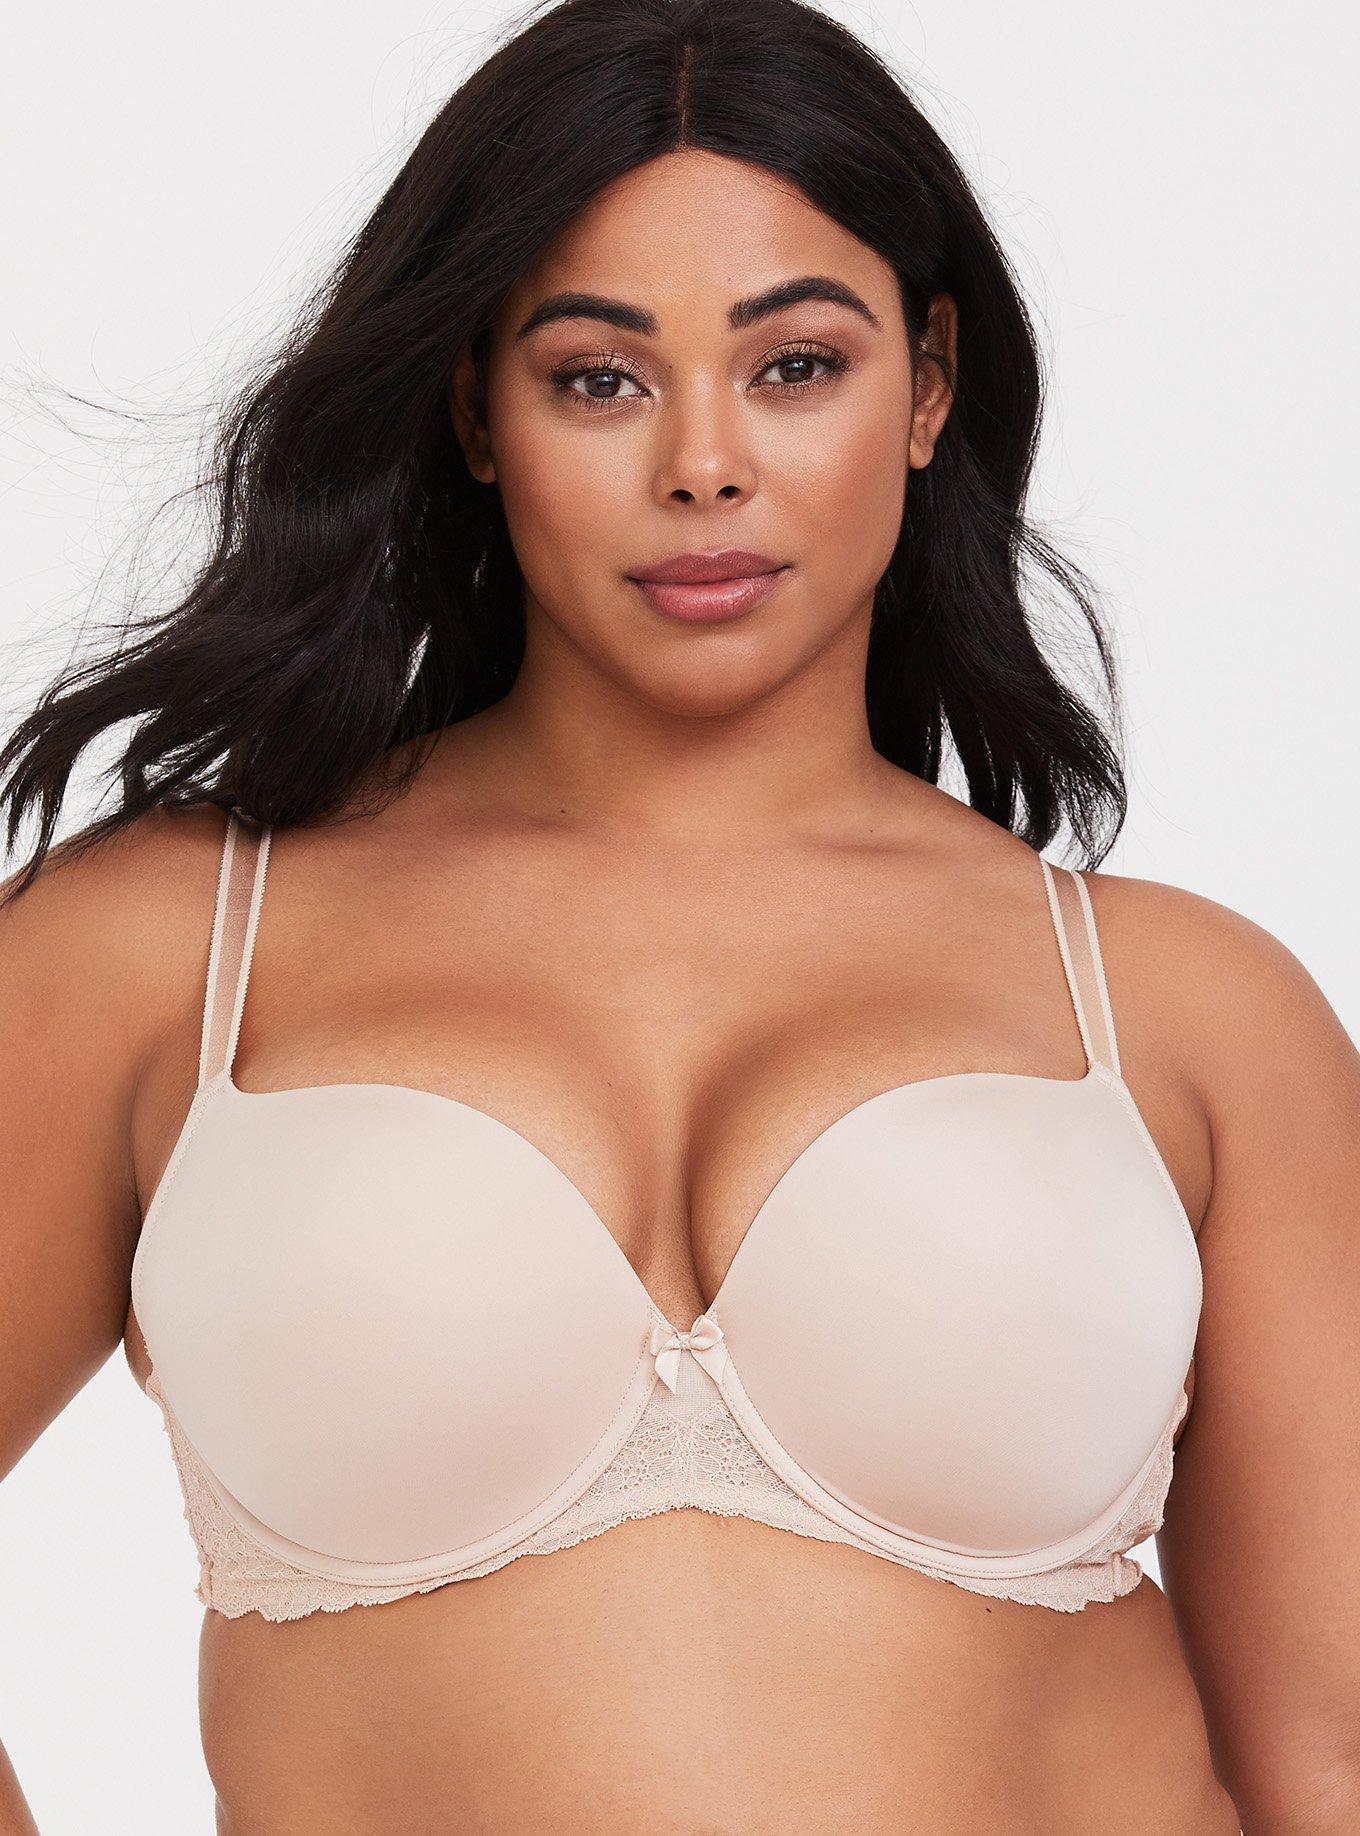 Plus Size Bra Push up wide back smaller cups sizes 16-26 (38-48) A